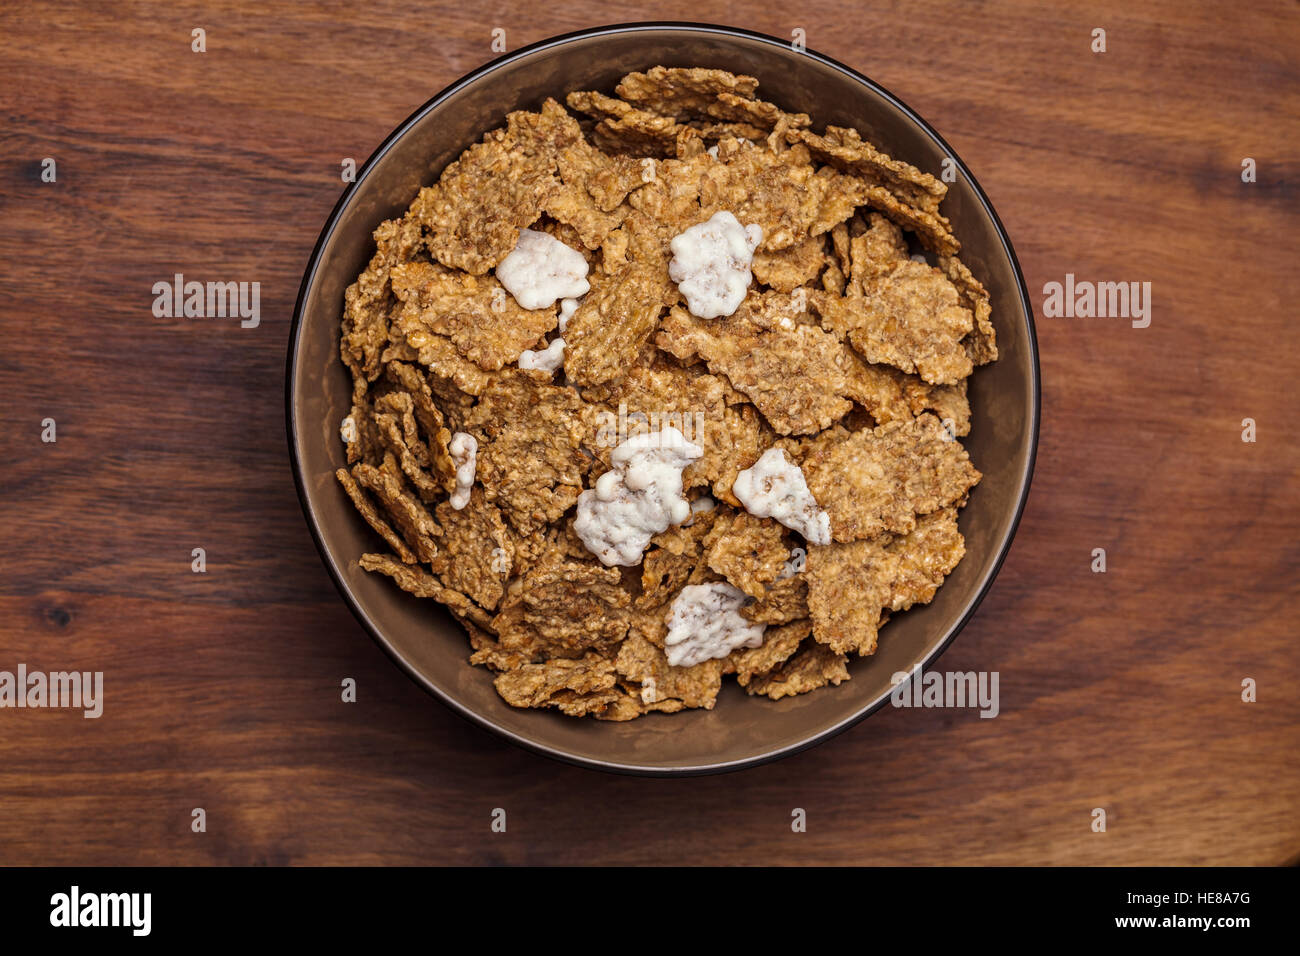 Image of bowl muesli on a wooden table. Stock Photo